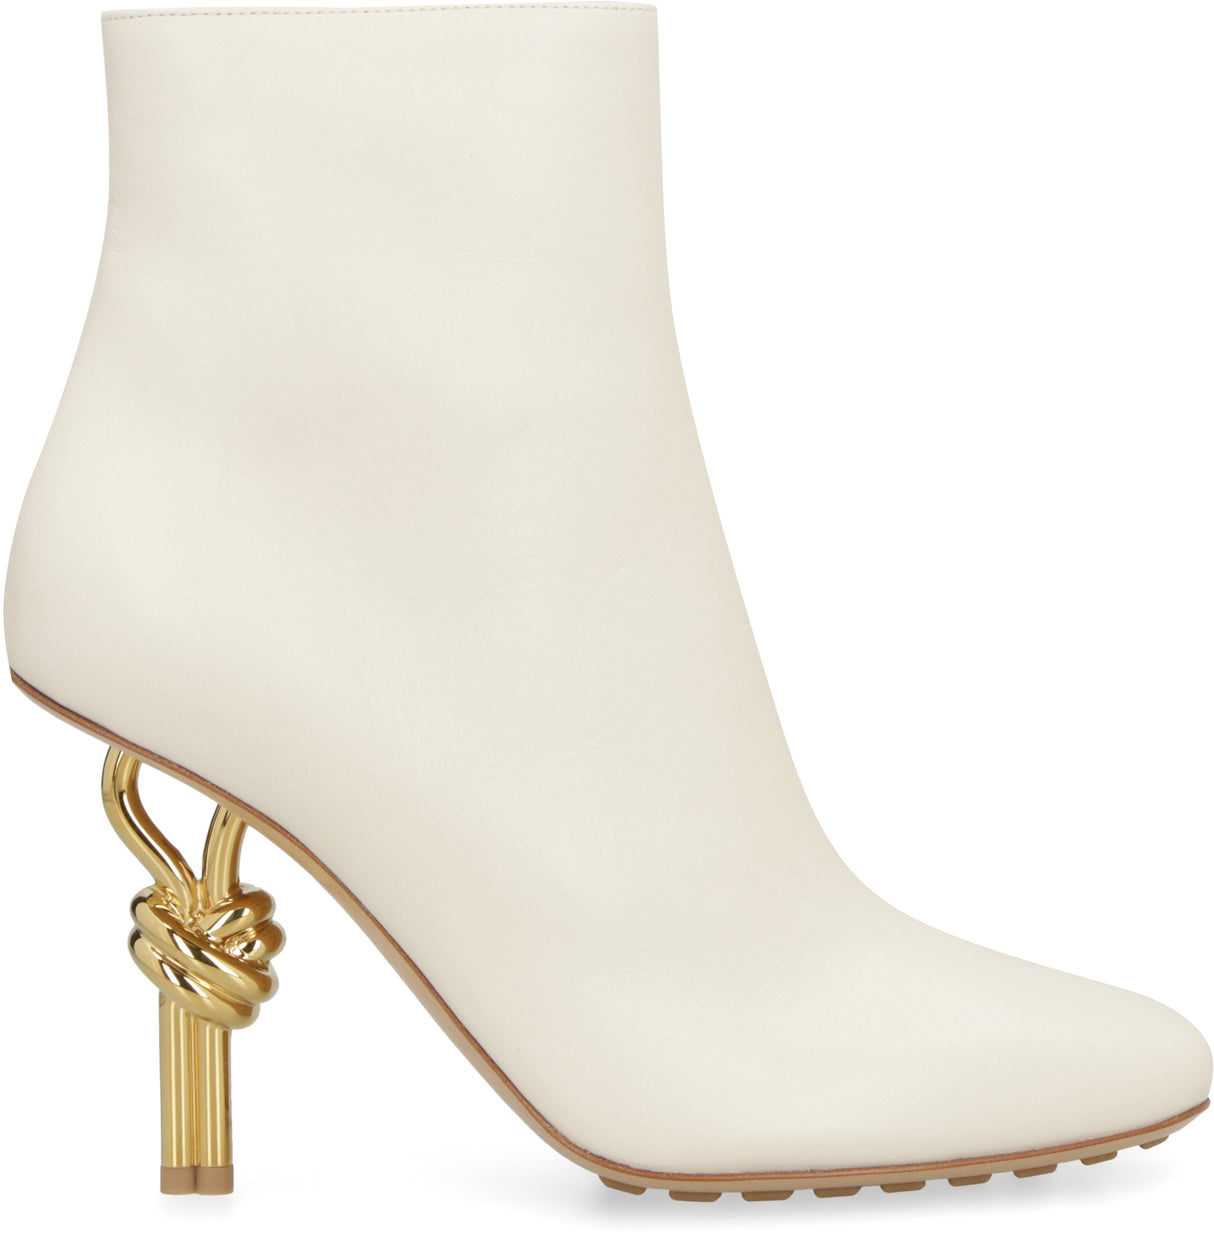 BOTTEGA VENETA Ivory Leather Ankle Boots with Square Toeline and Gold-Tone Metal Heel for Women